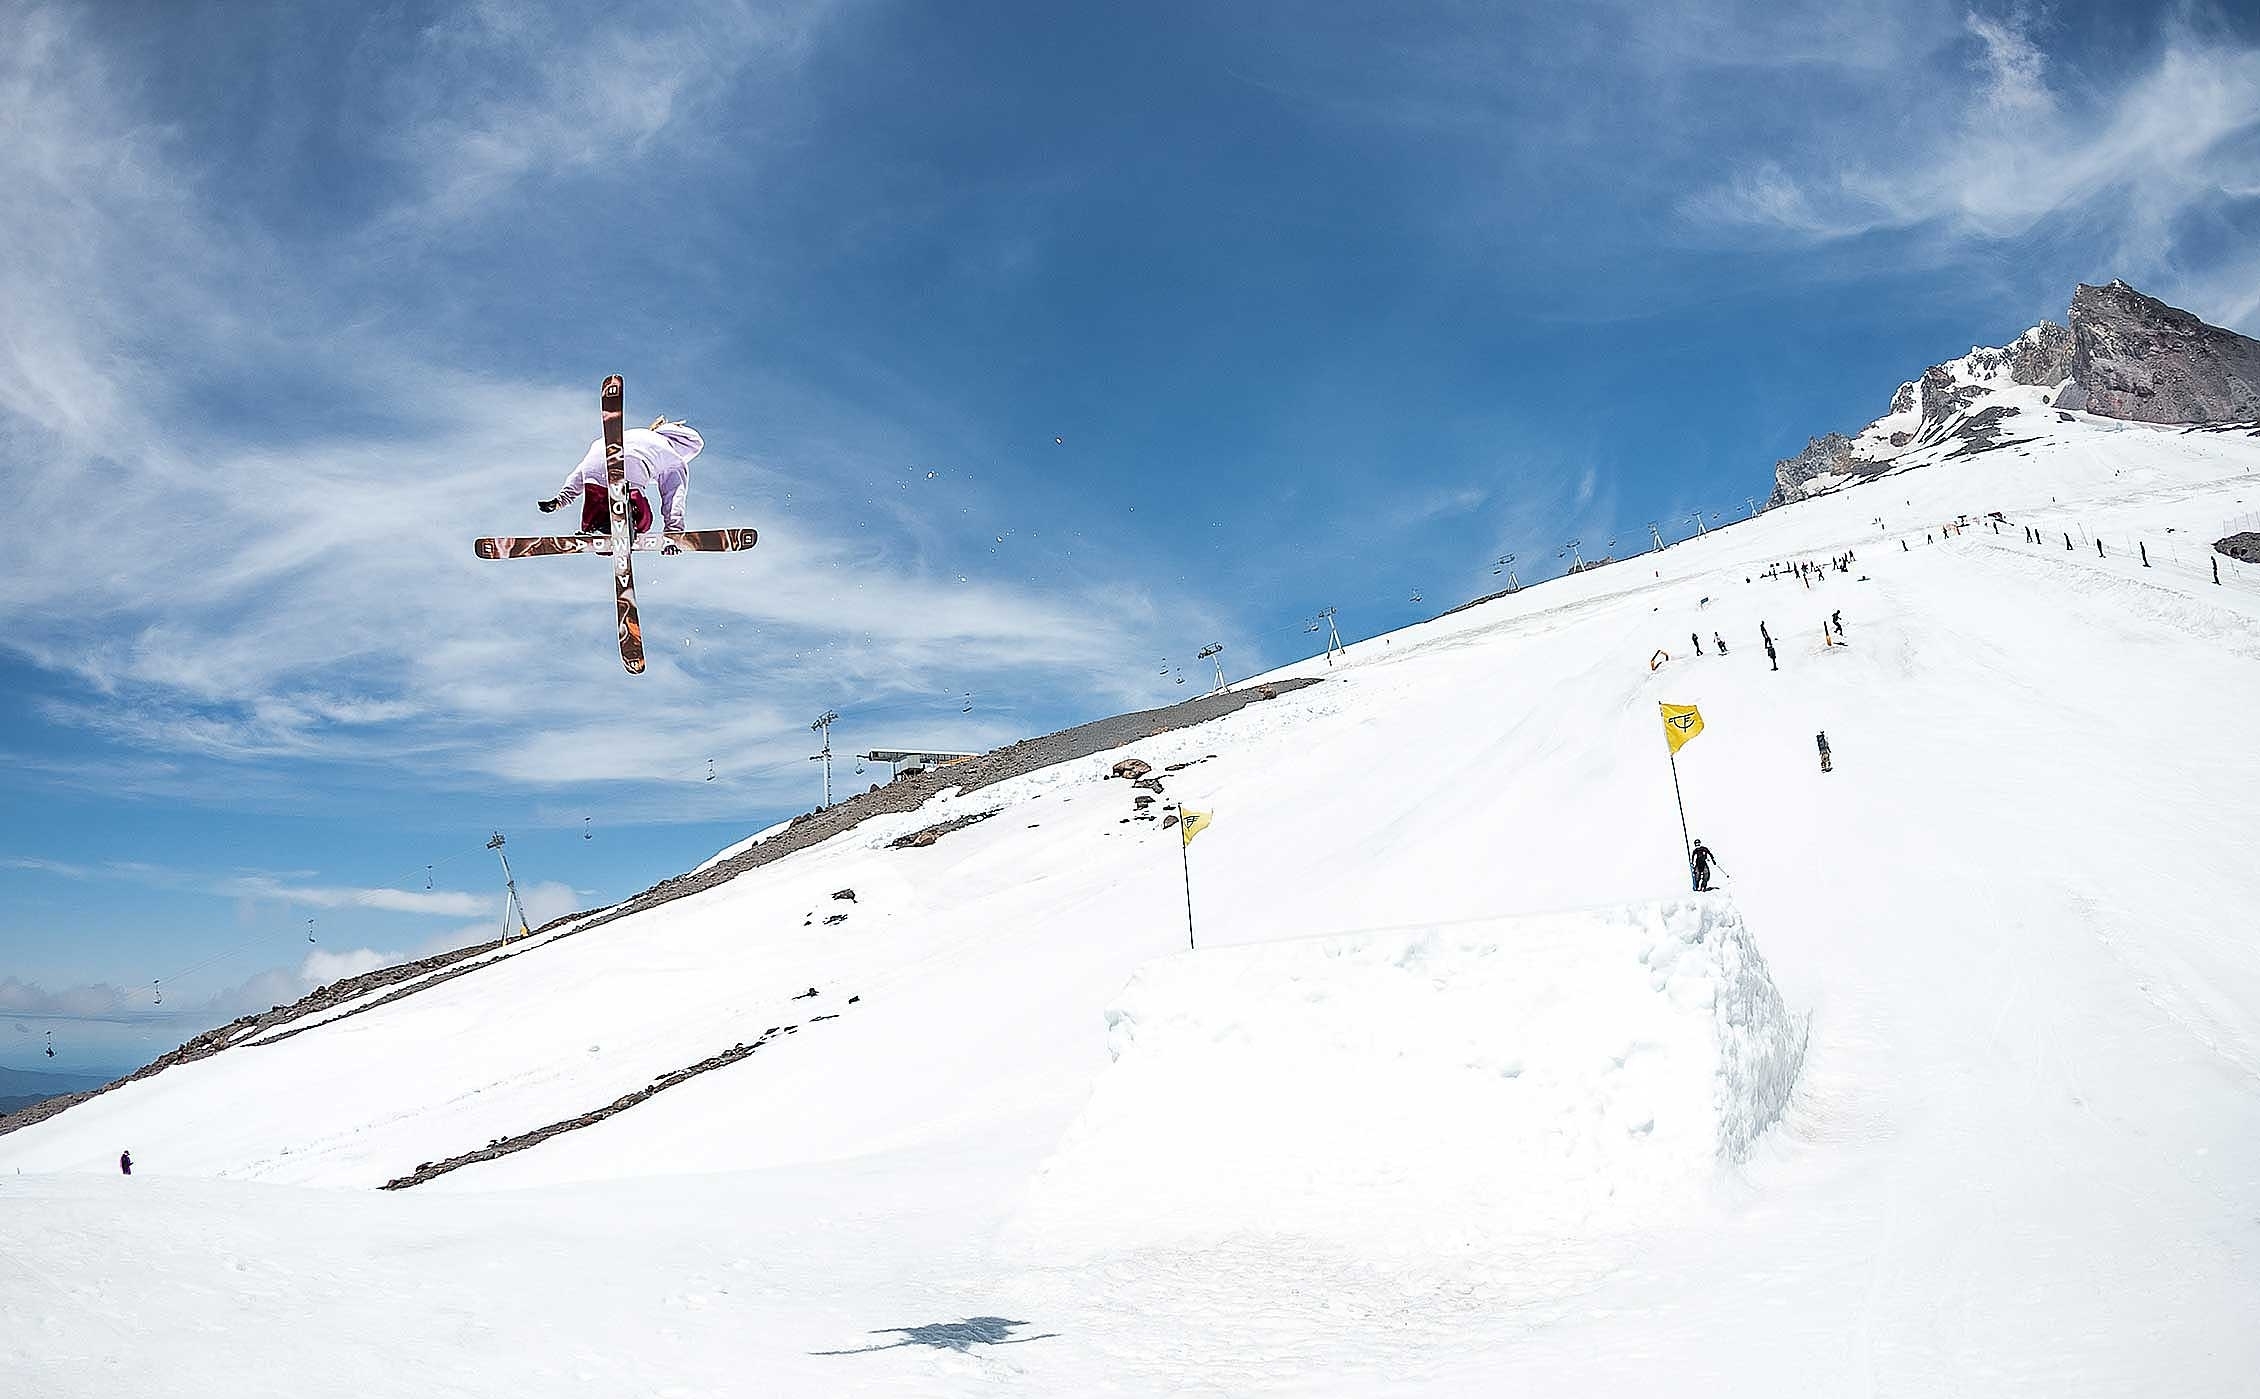 SKIER TAKING A BIG JUMP AT TIMBERLINE FREESTYLE TRAINING CENTER